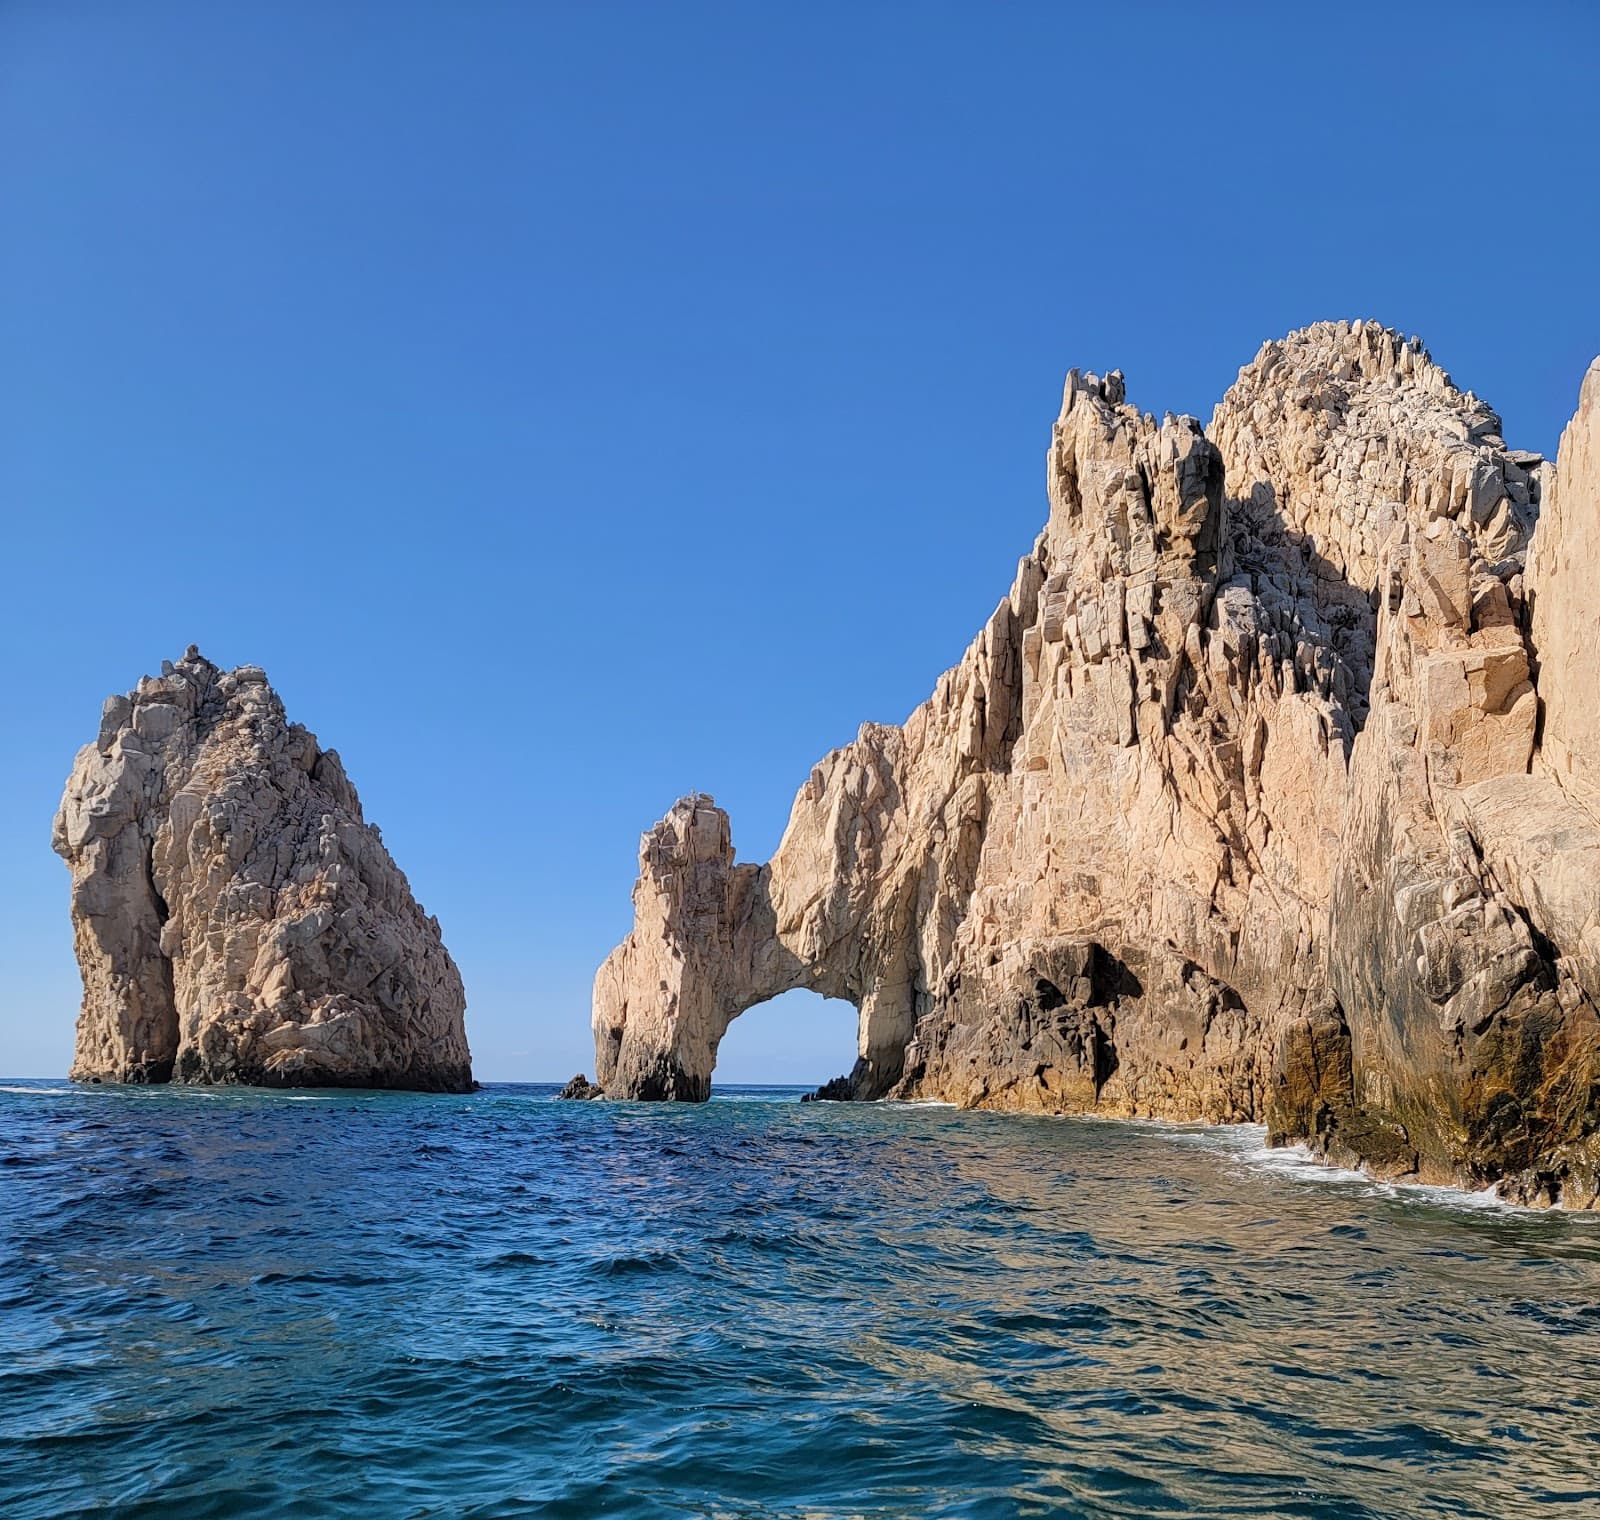 Sandee - The Arch Of Cabo San Lucas